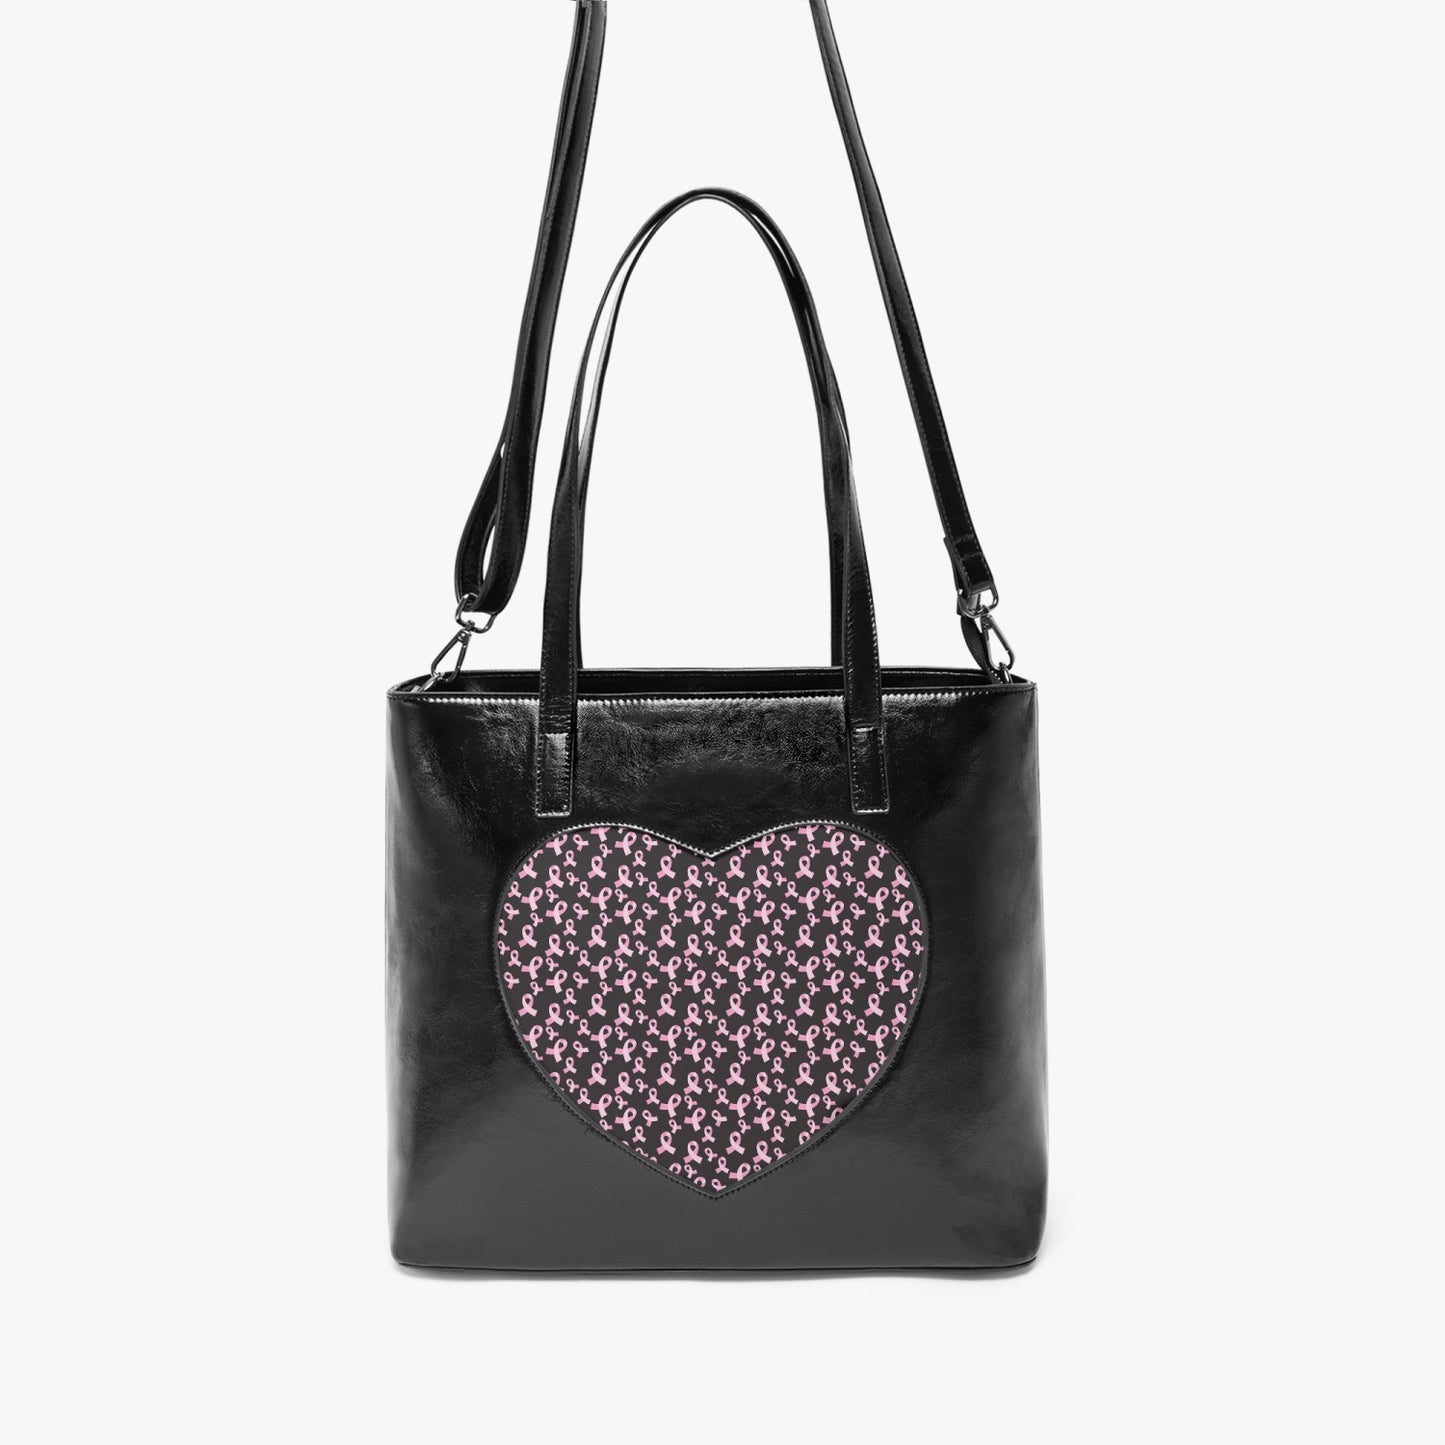 722. BREAST CANCER AWARENESS Heart Tote Bag